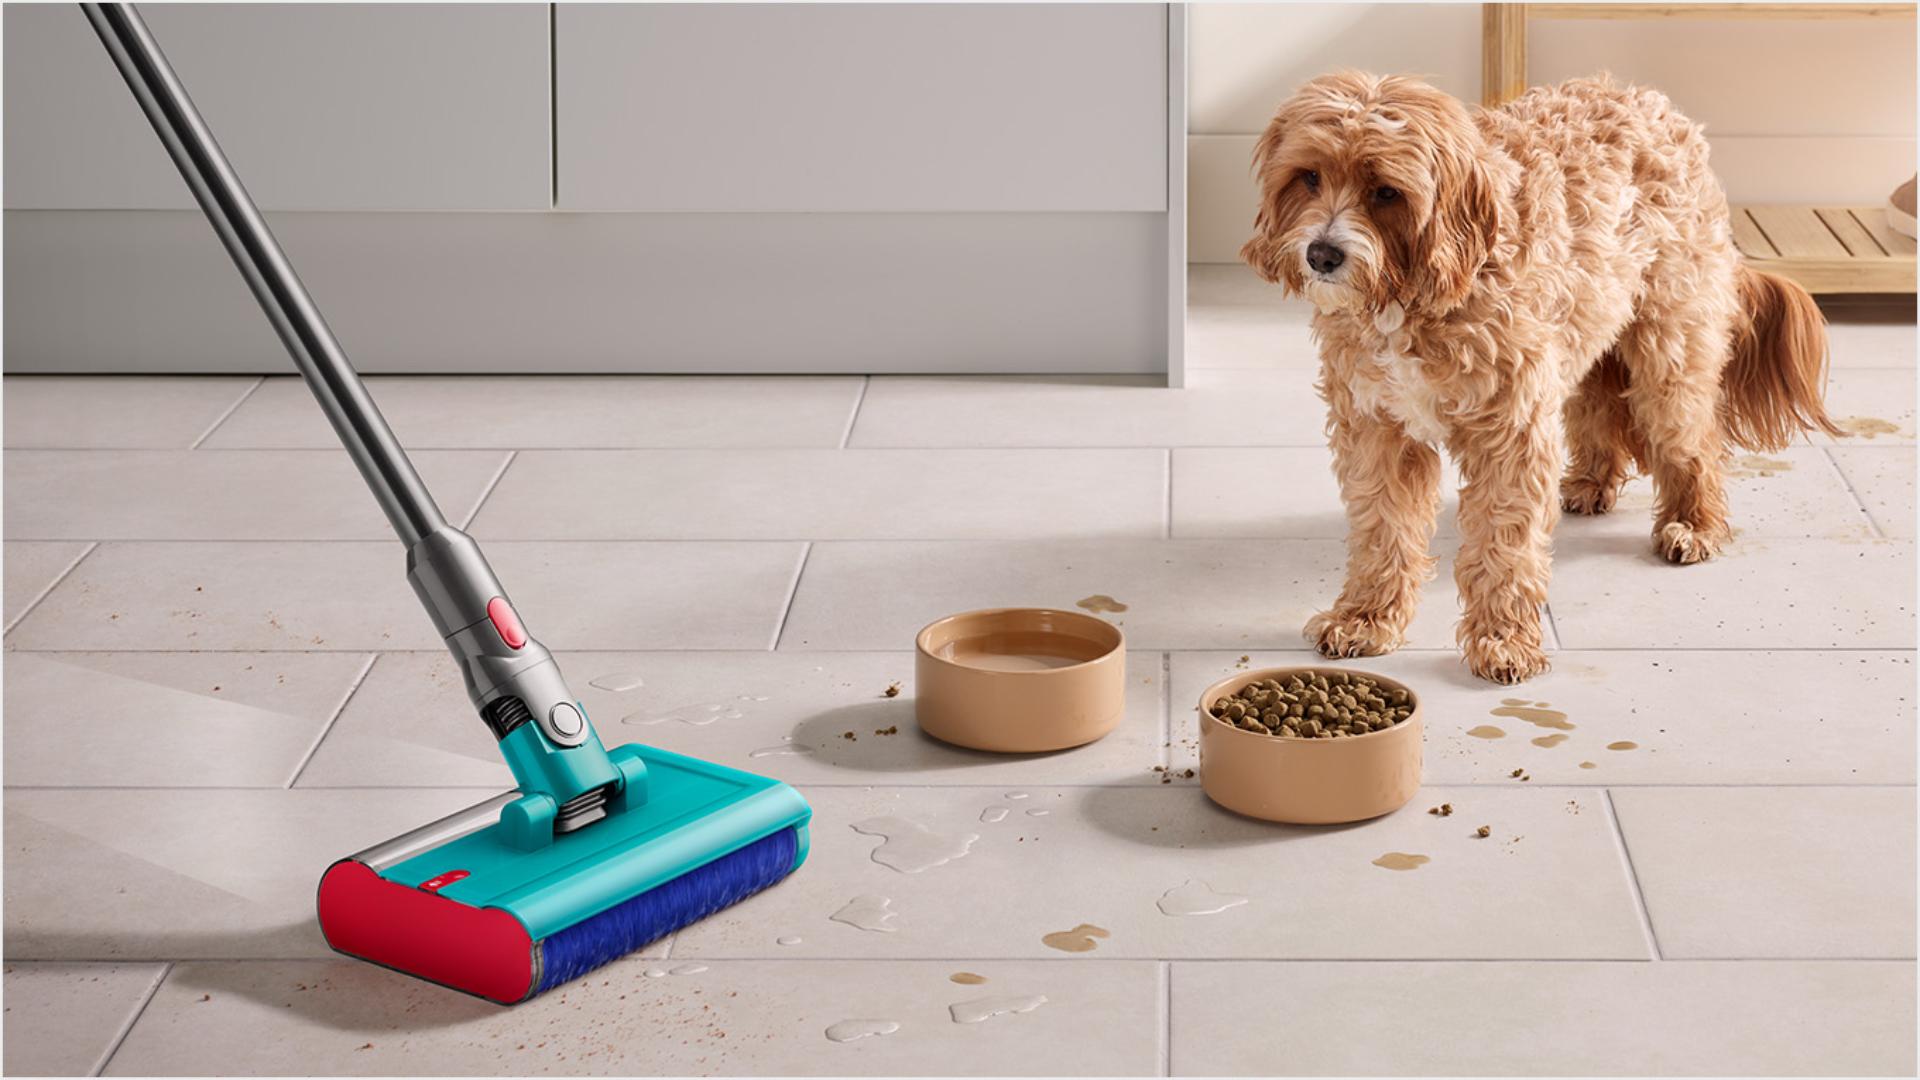 Dog stares past food and water bowl as Dyson Submarine wet roller head cleans.